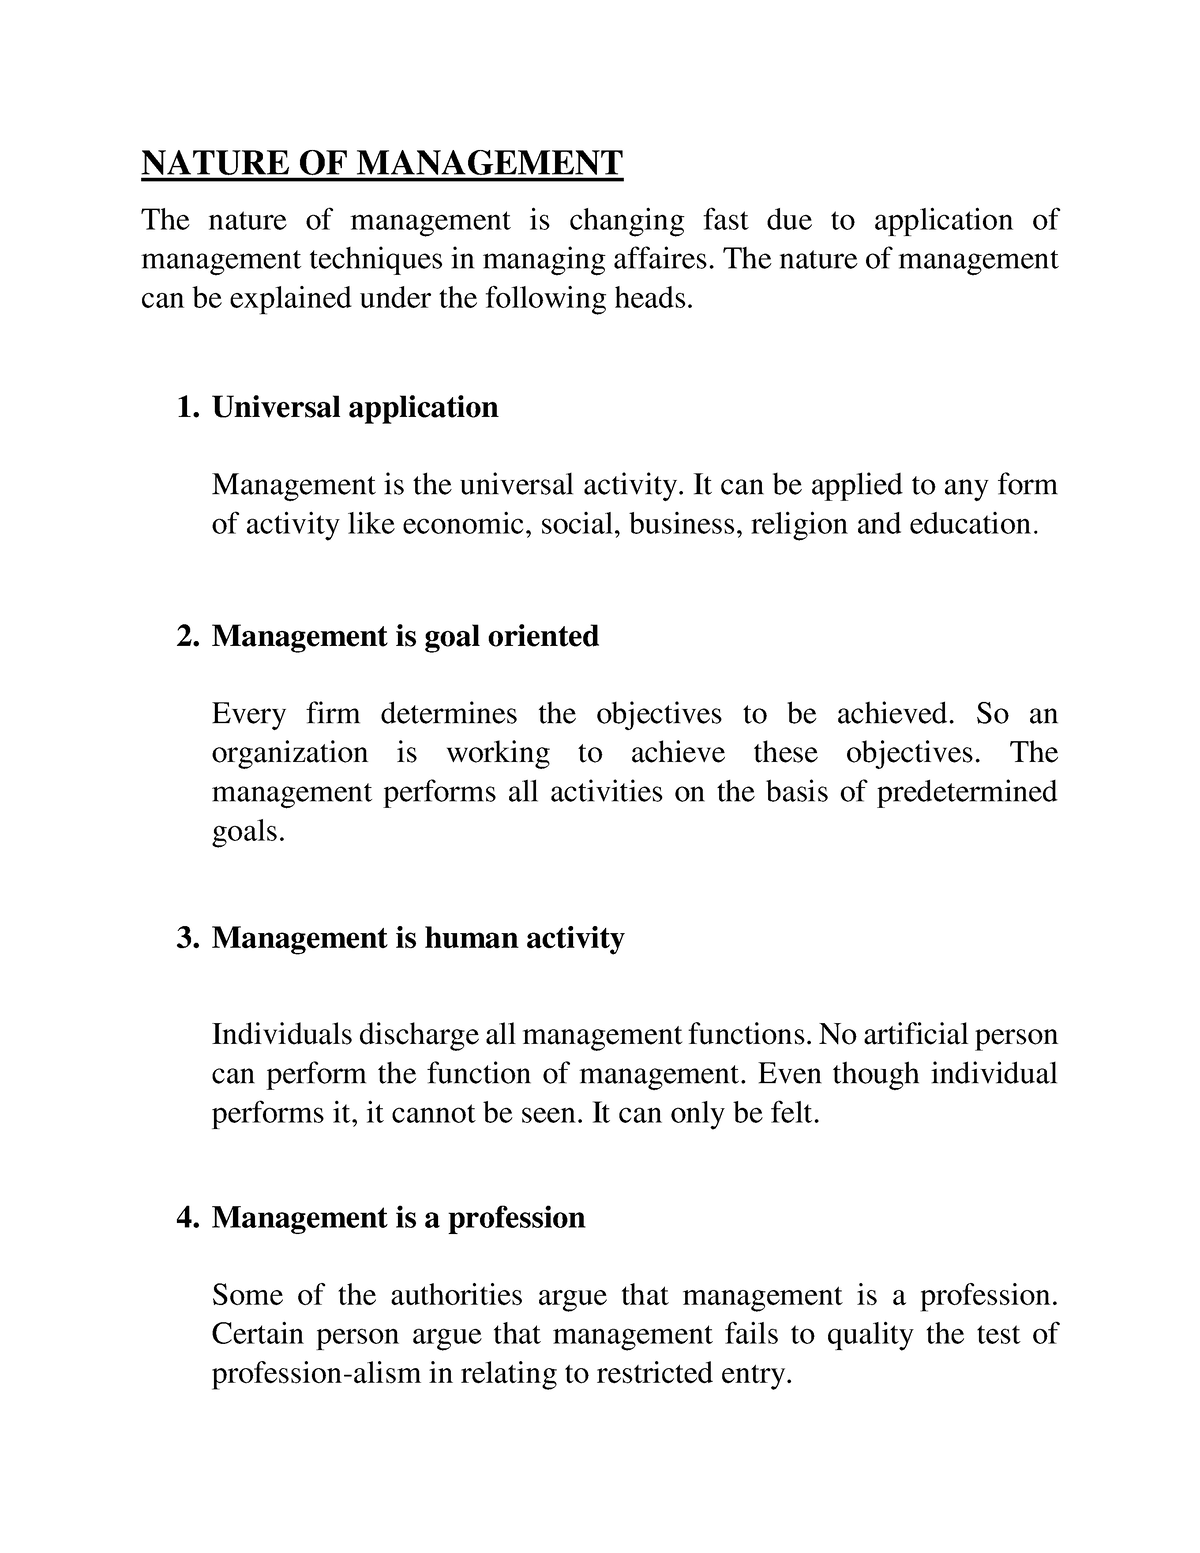 essay on nature of management